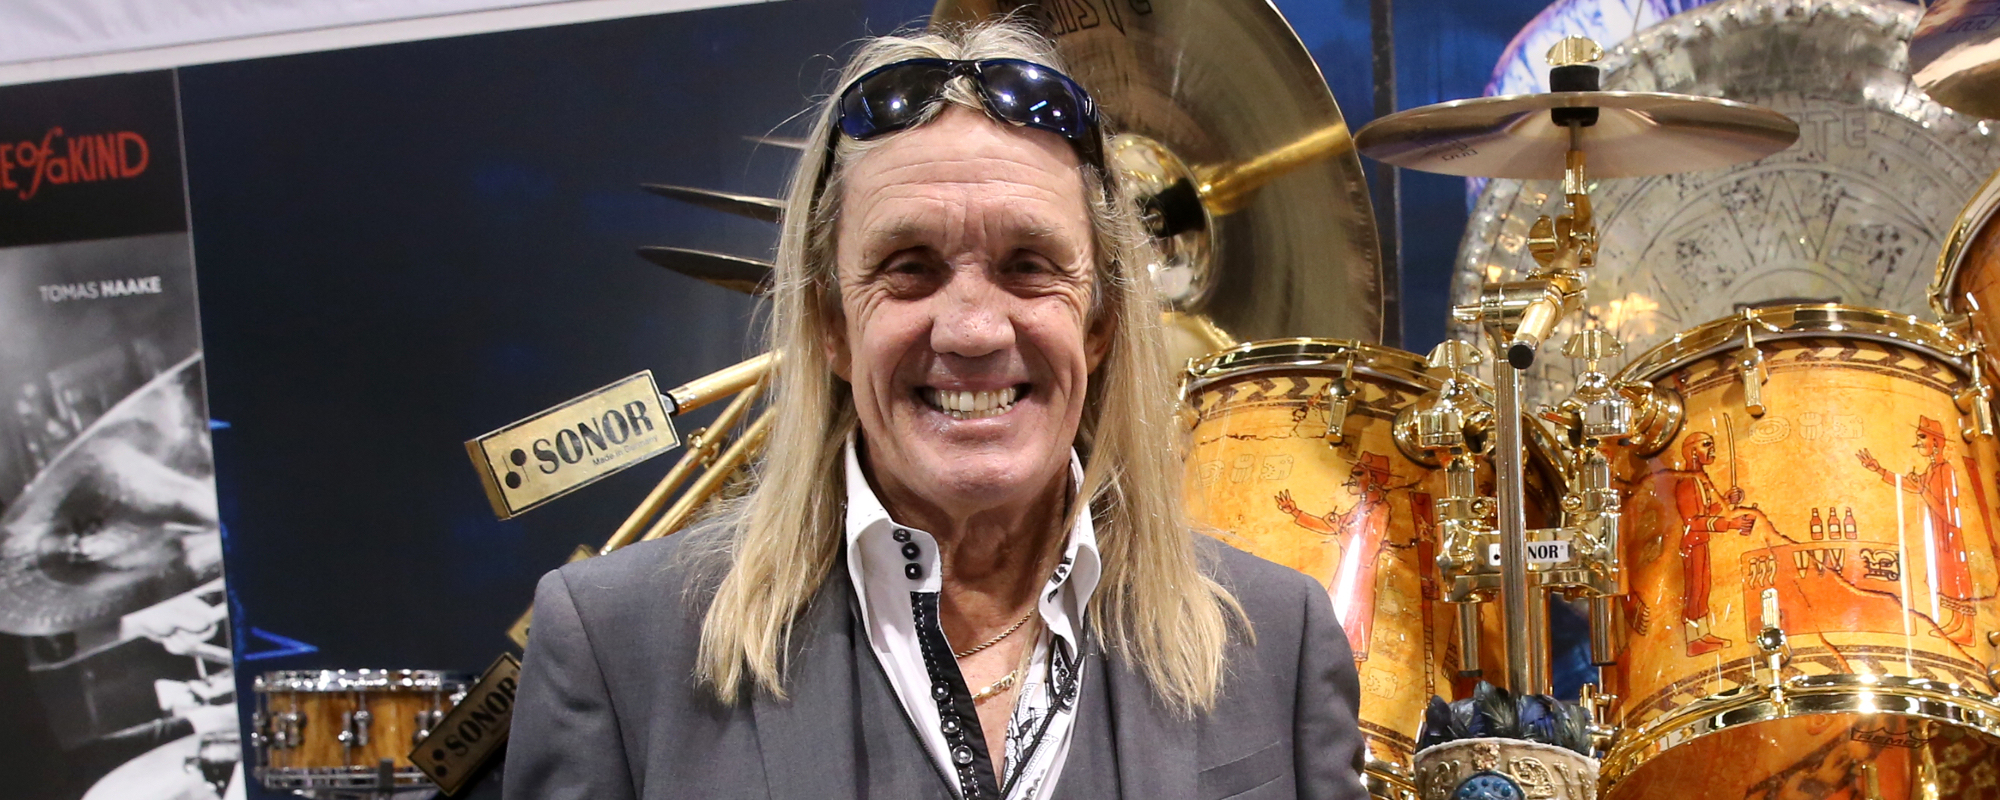 Iron Maiden’s Nicko McBrain Opens Up About Stroke and Fears of Never Playing Again